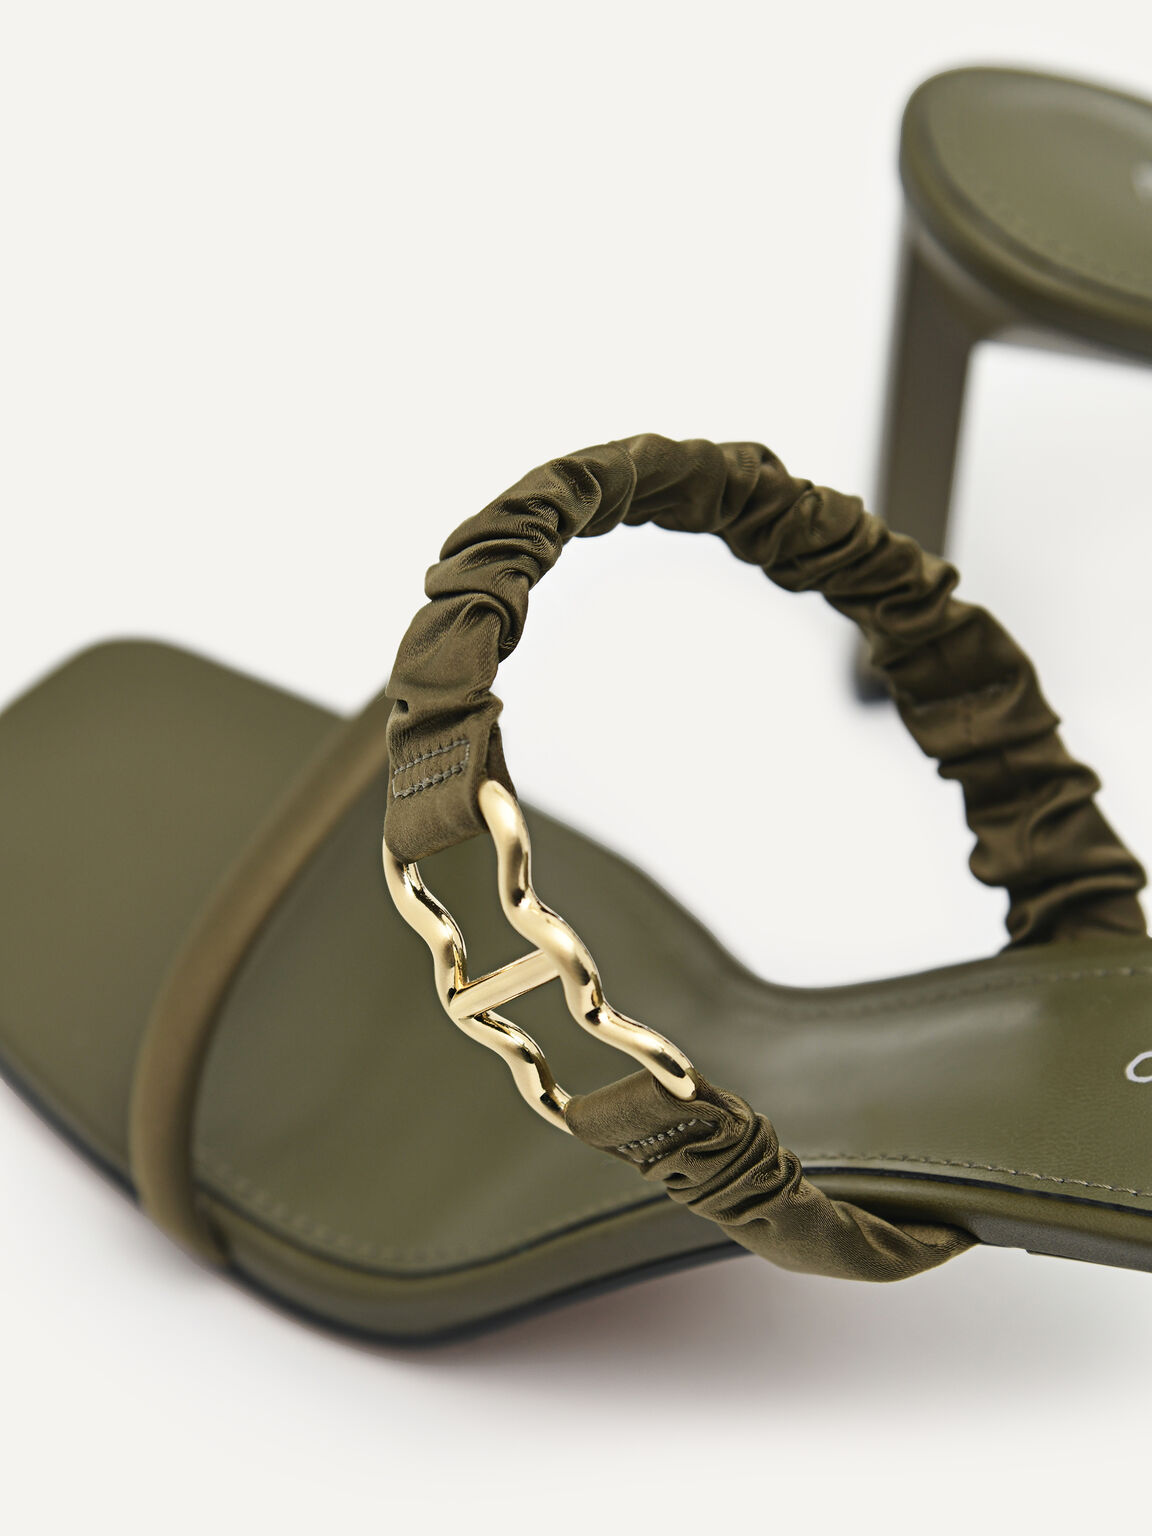 Double Strap Heeled Sandals, Military Green